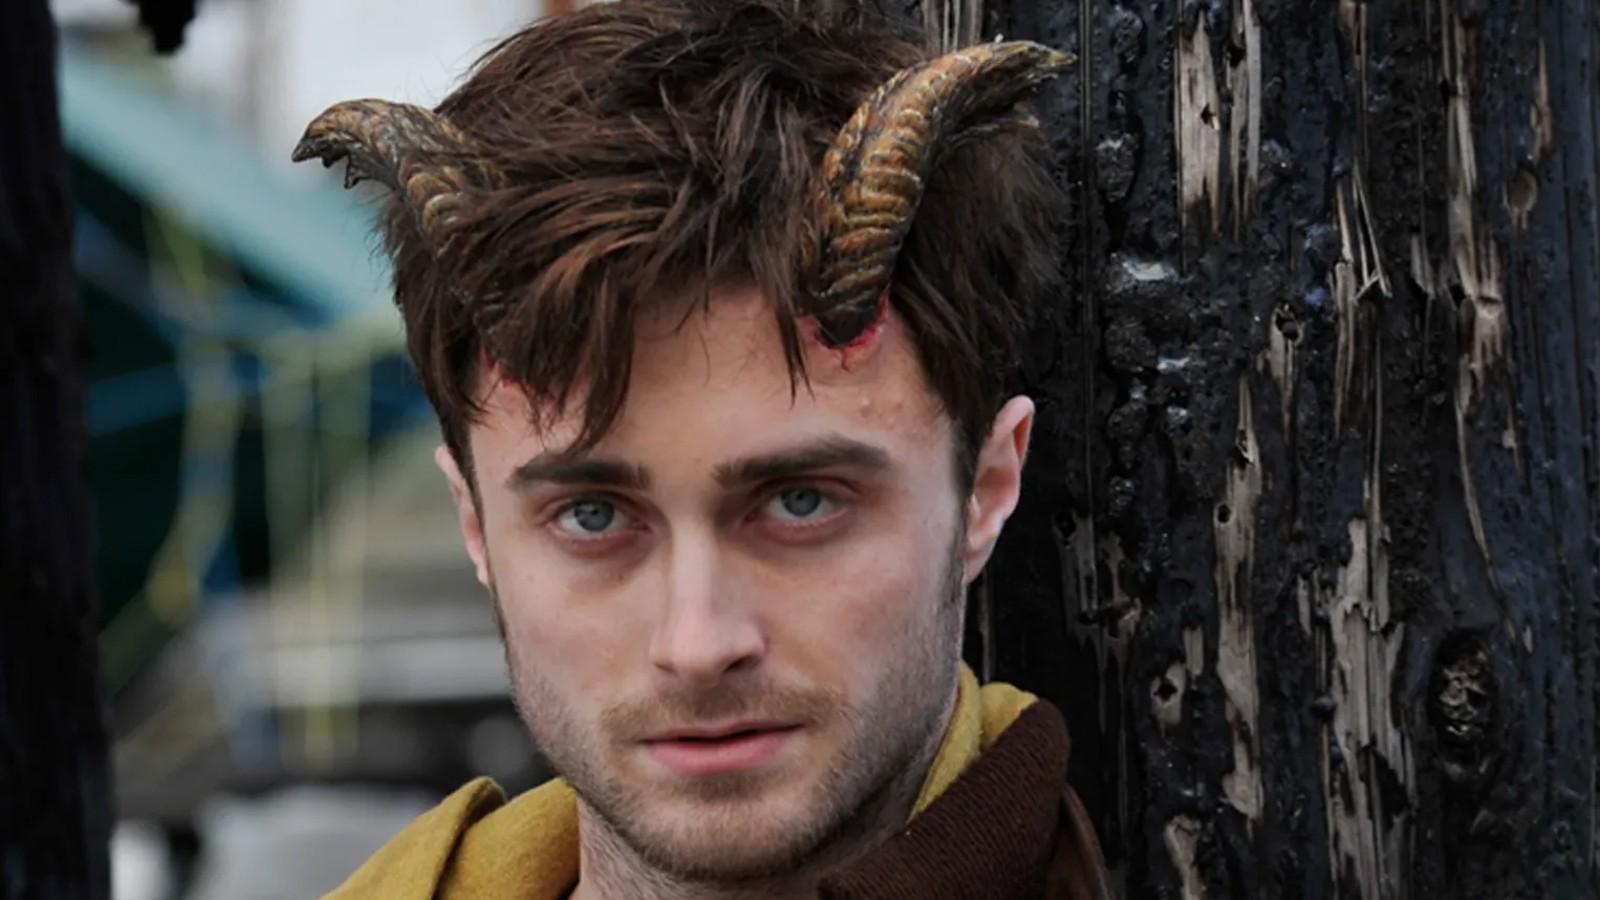 Daniel Radcliffe with Horns in Horns.